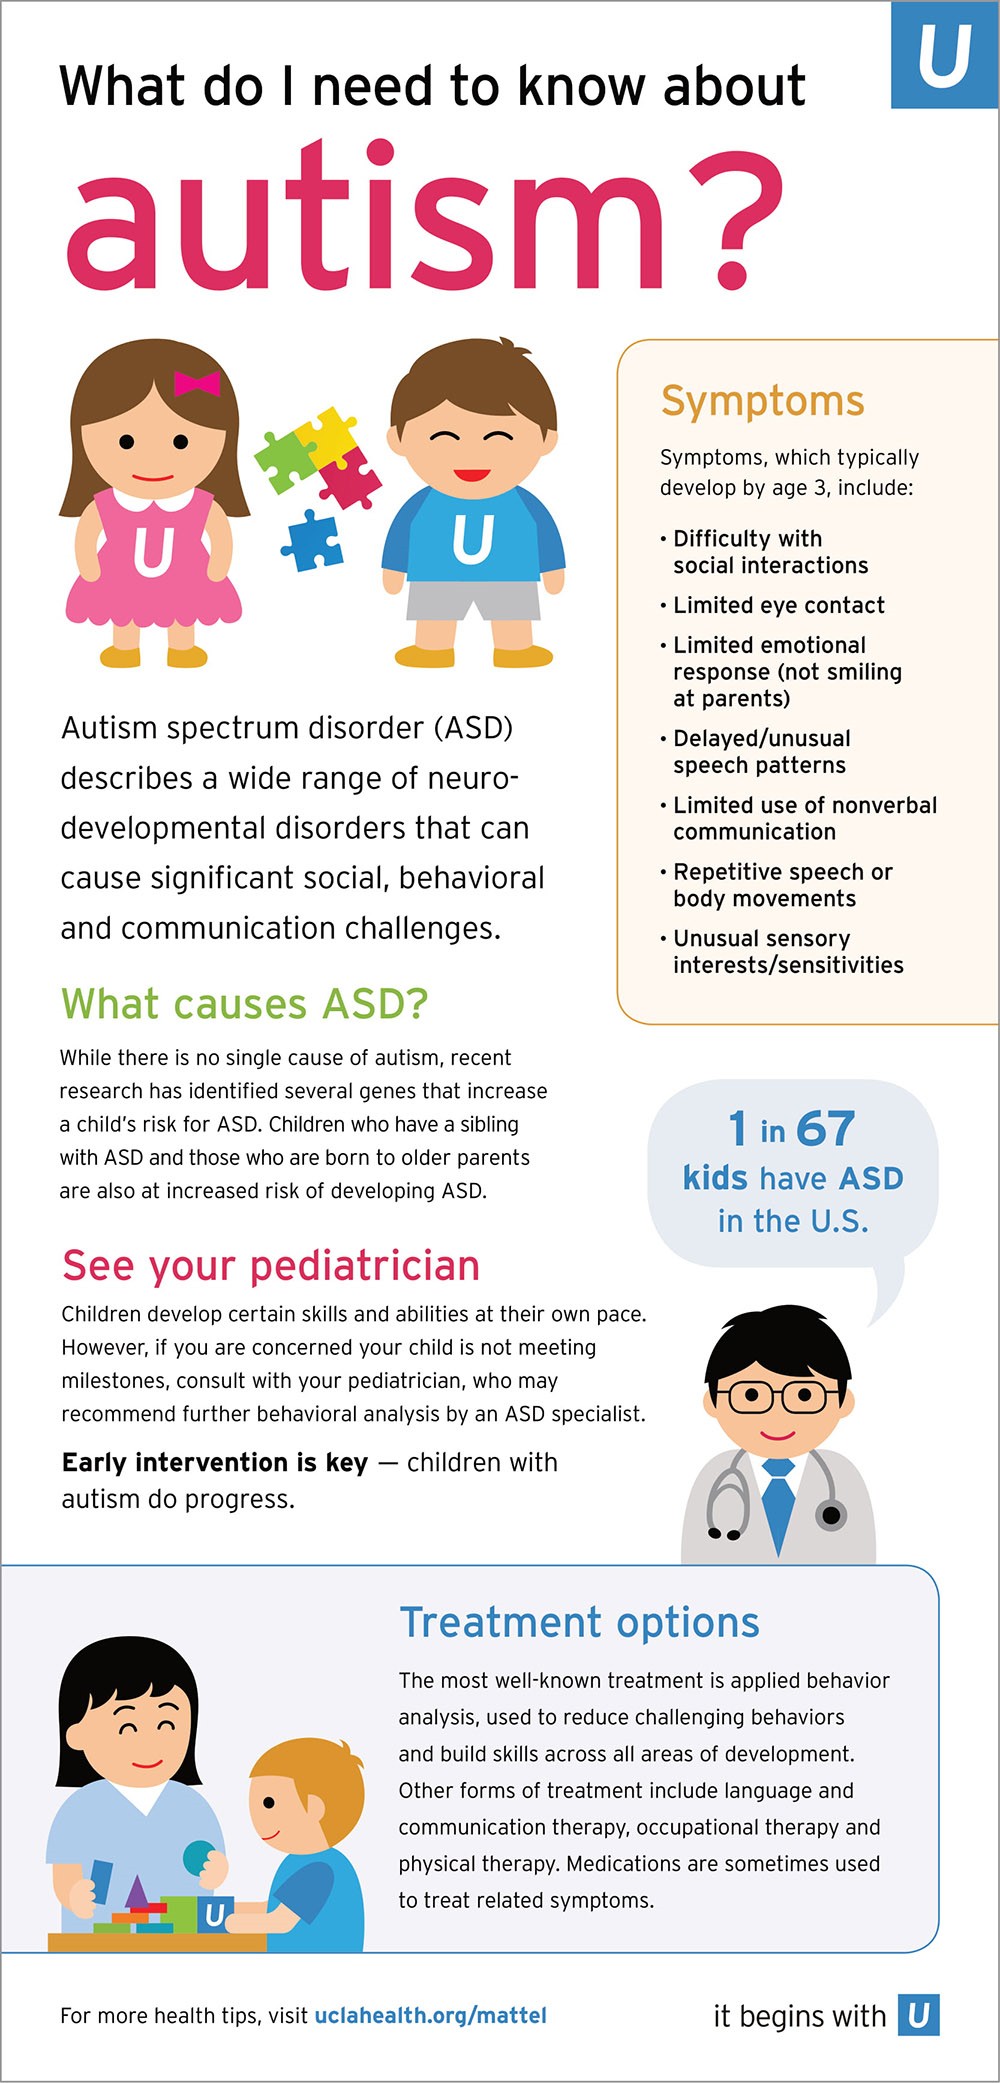 health-tips-for-parents-autism-spectrum-disorder-asd-in-children-infographics